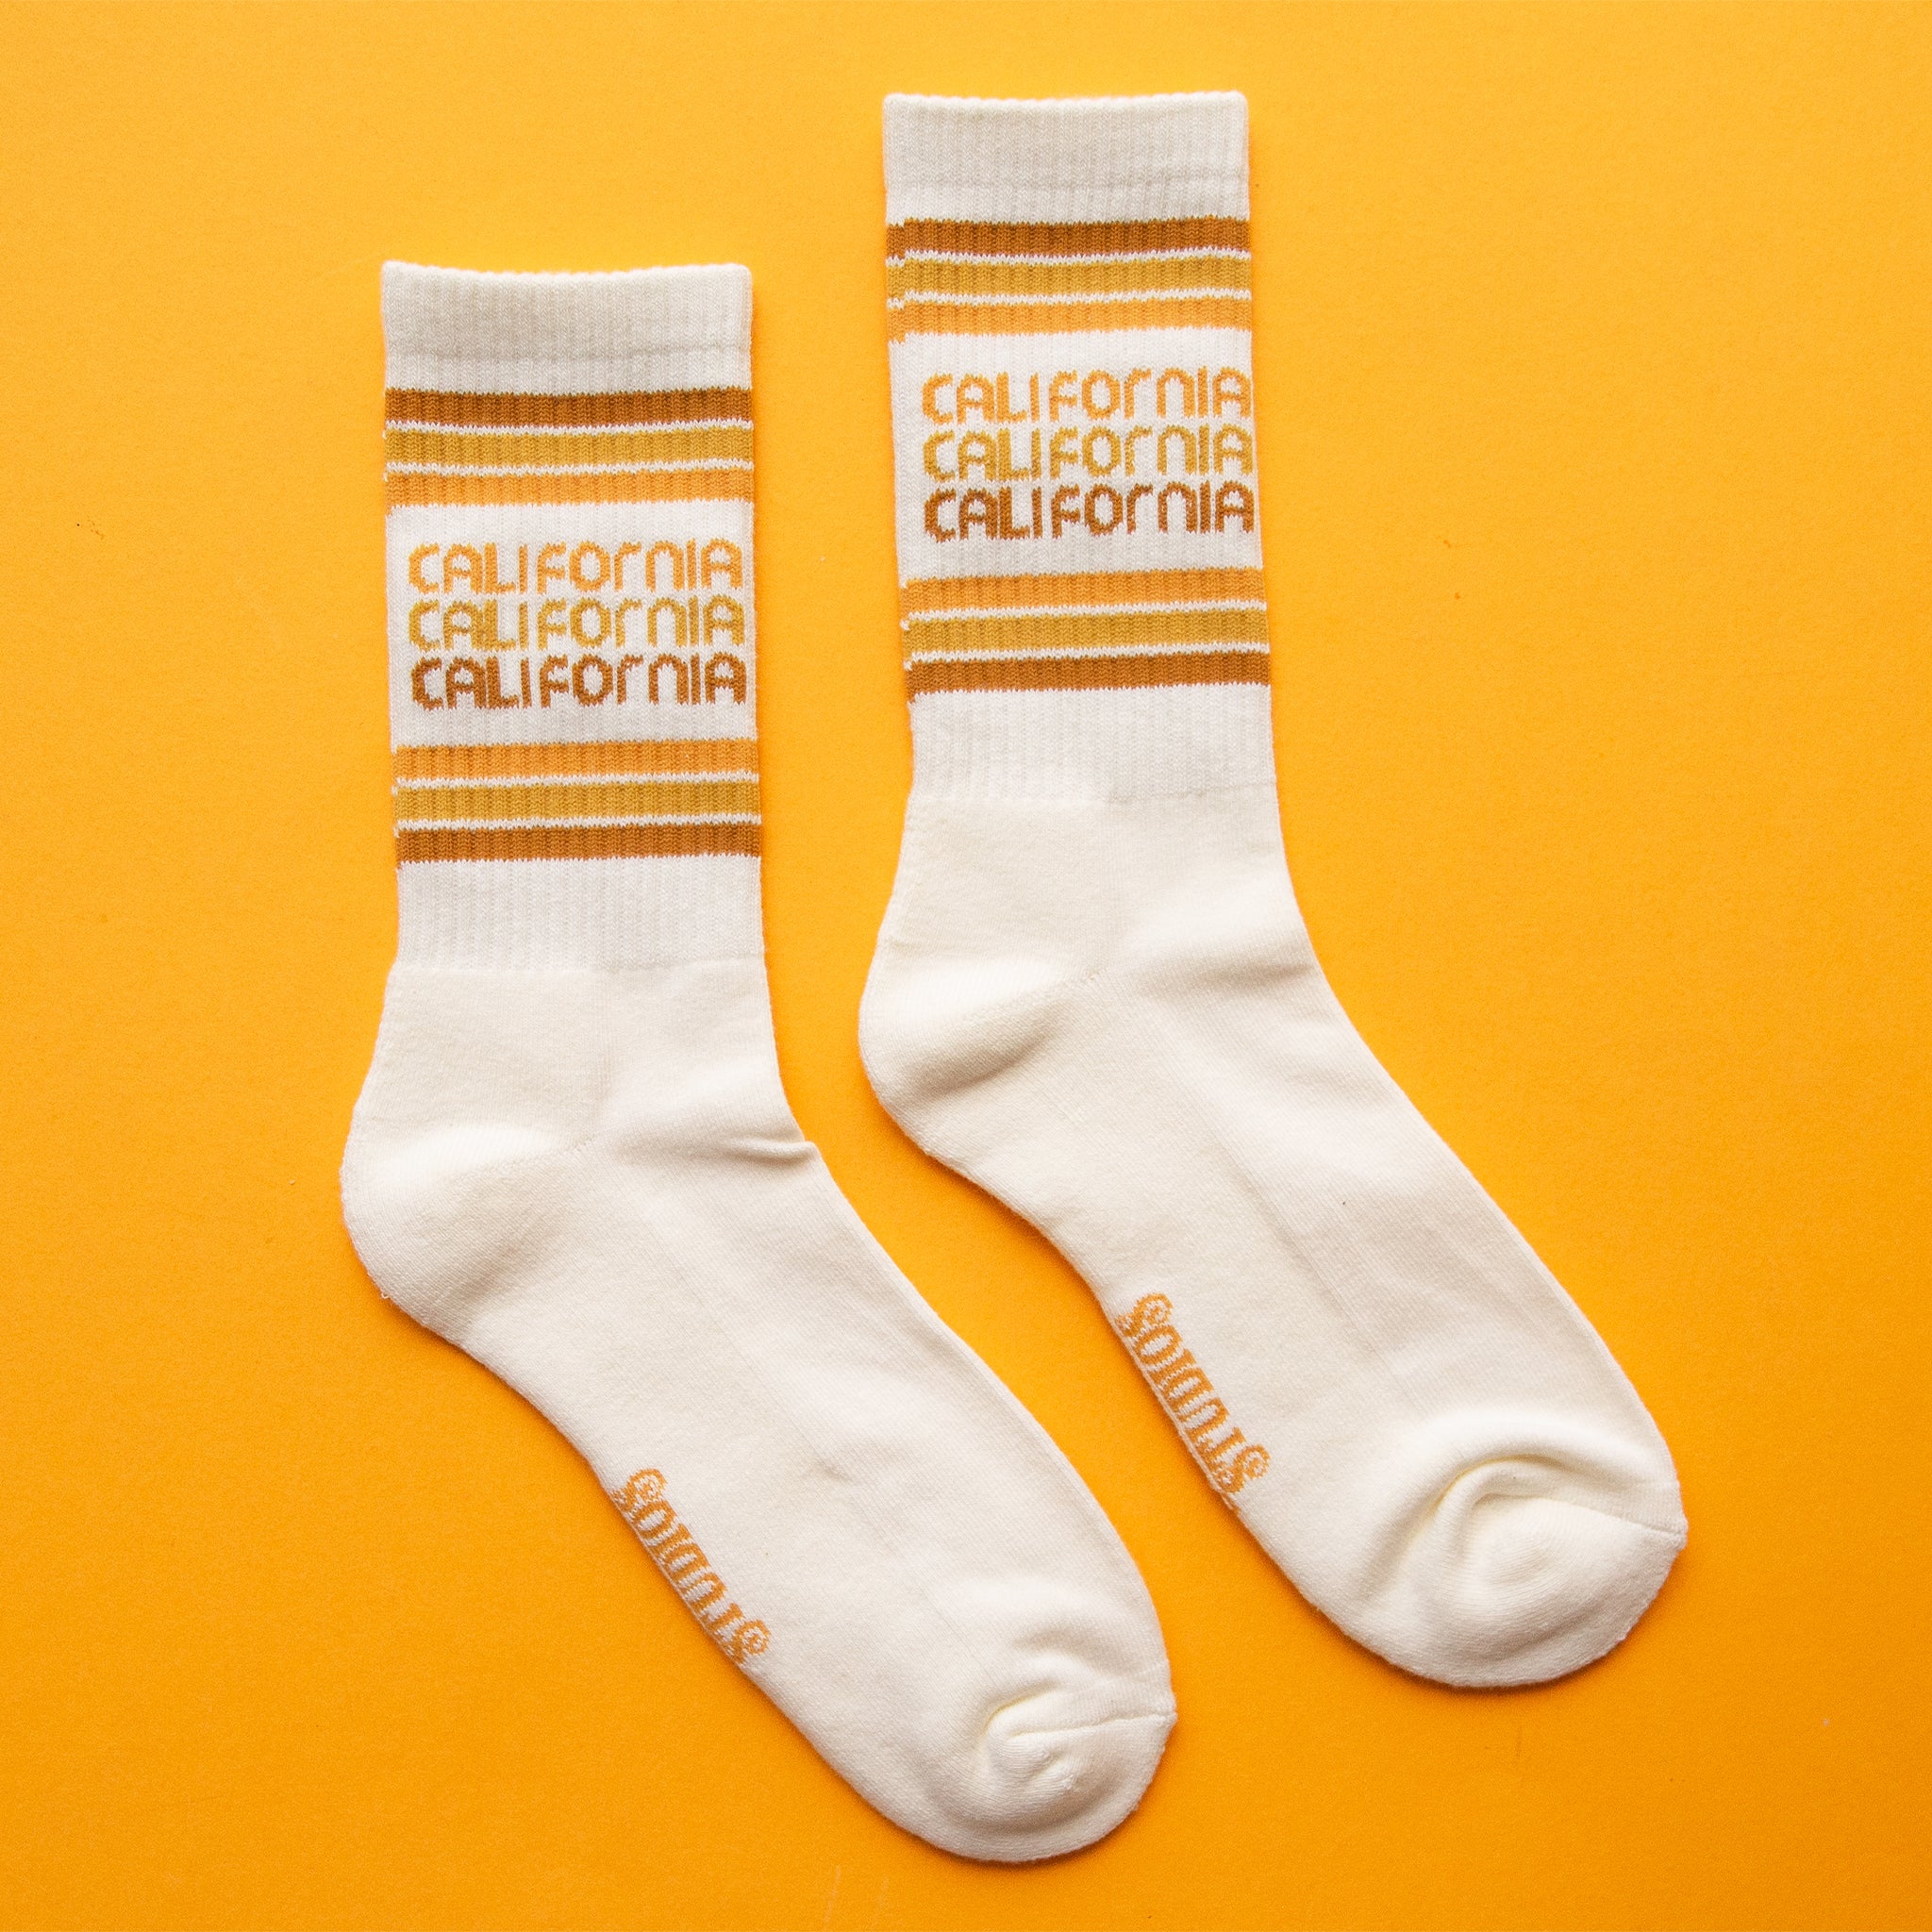 On a yellow background is a white socks with rust, yellow and orange stripes and "california" printed three times on the ankle.